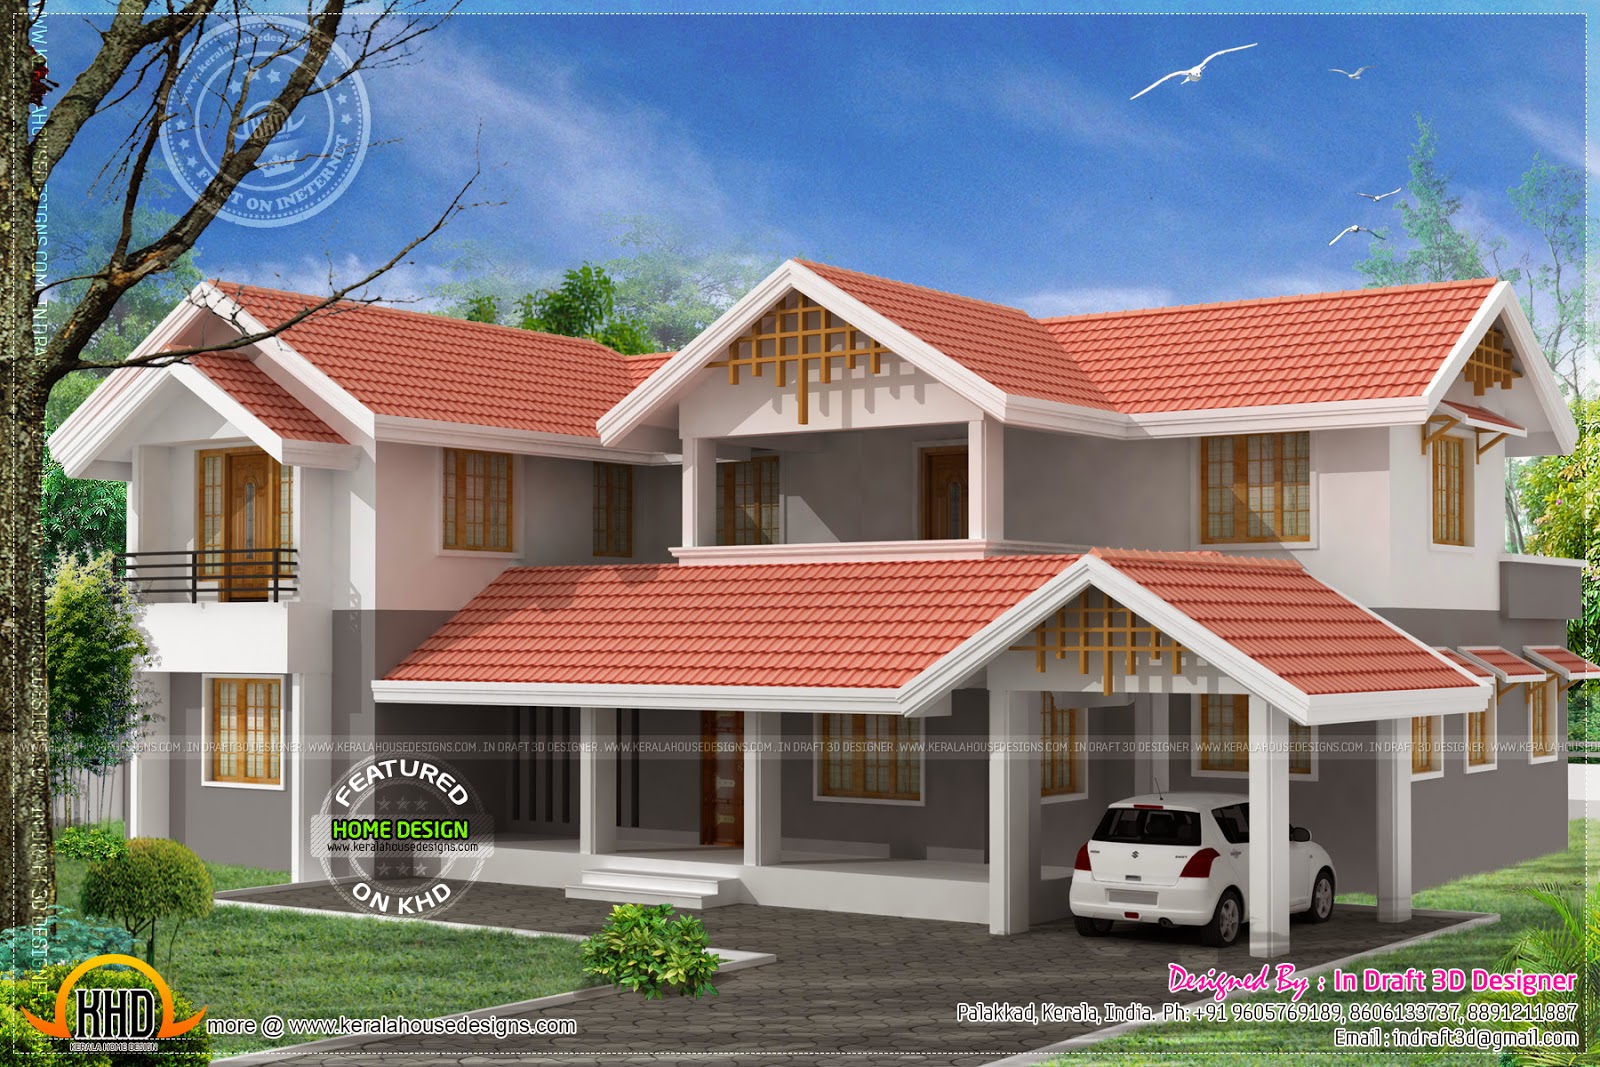 3D home design in 2860 sq-feet - Kerala home design and ...